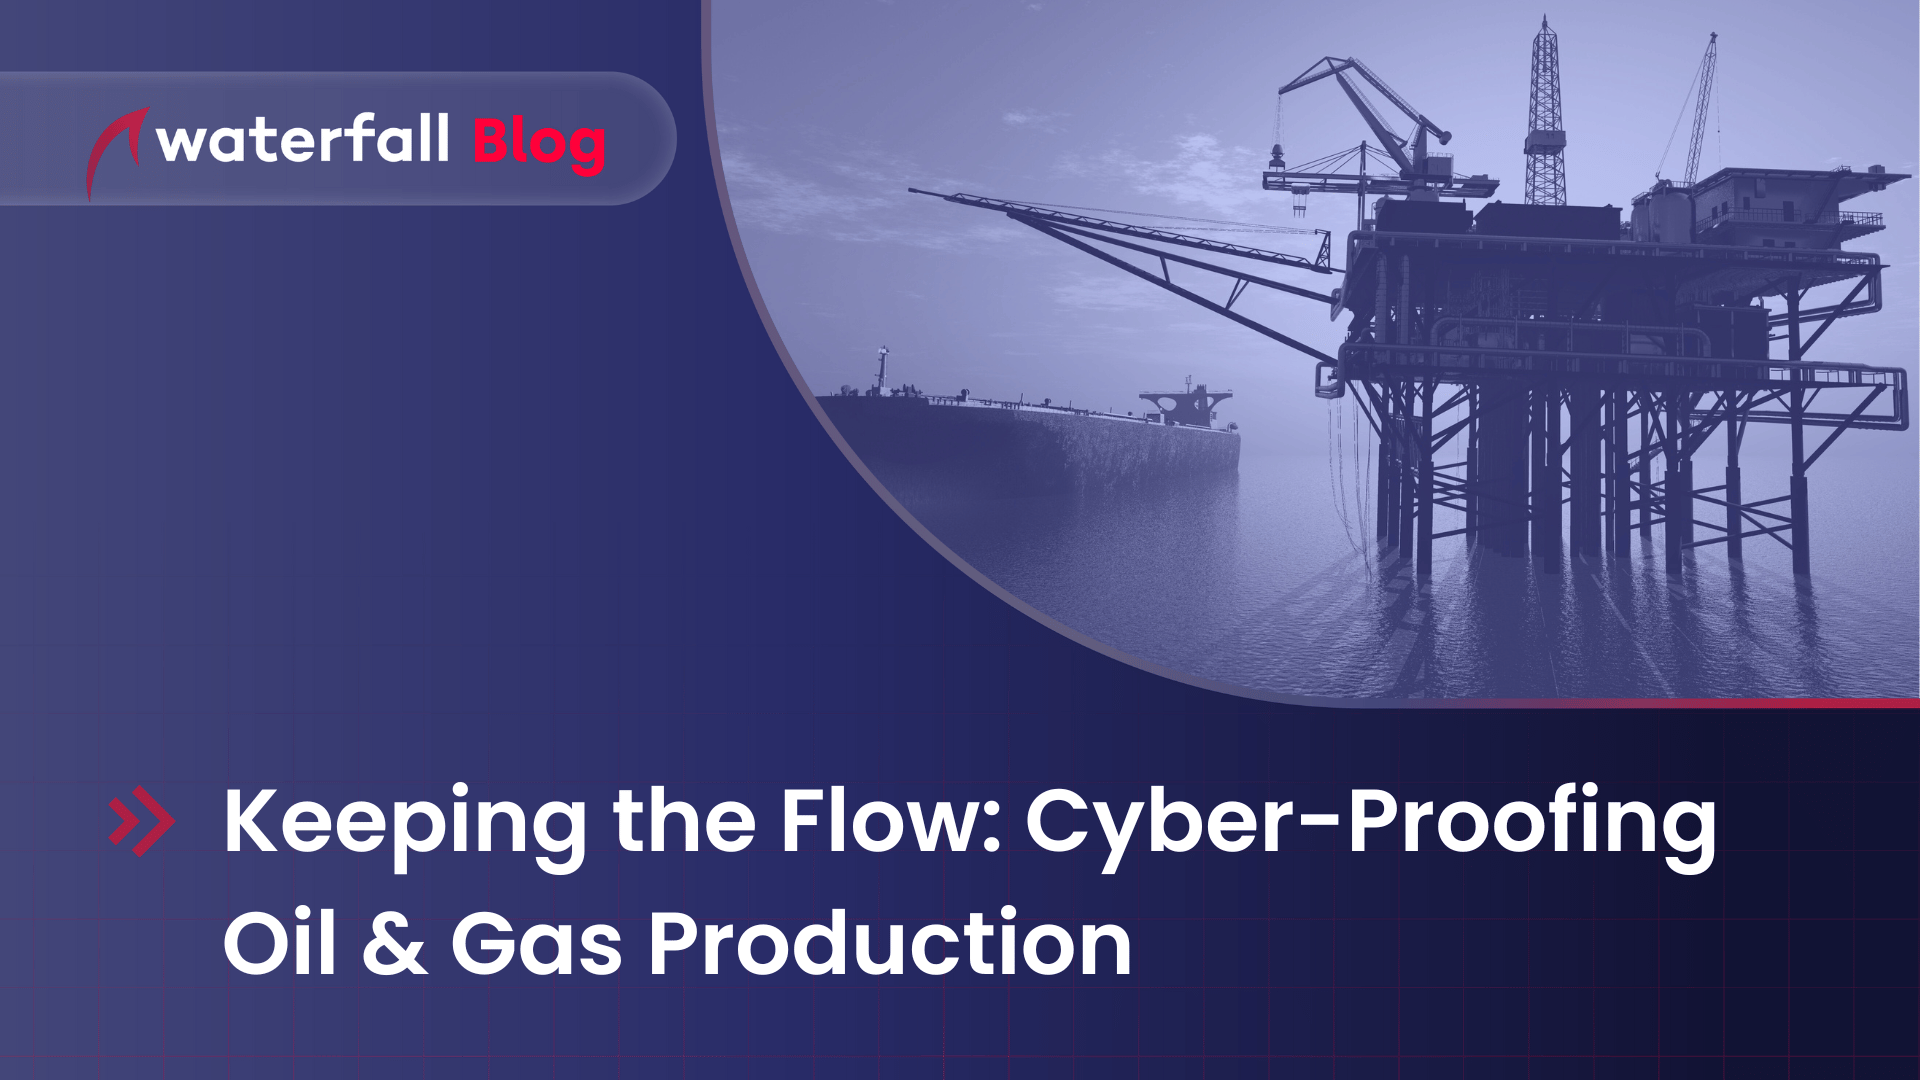 Cyberproofing Oil and Gas Production